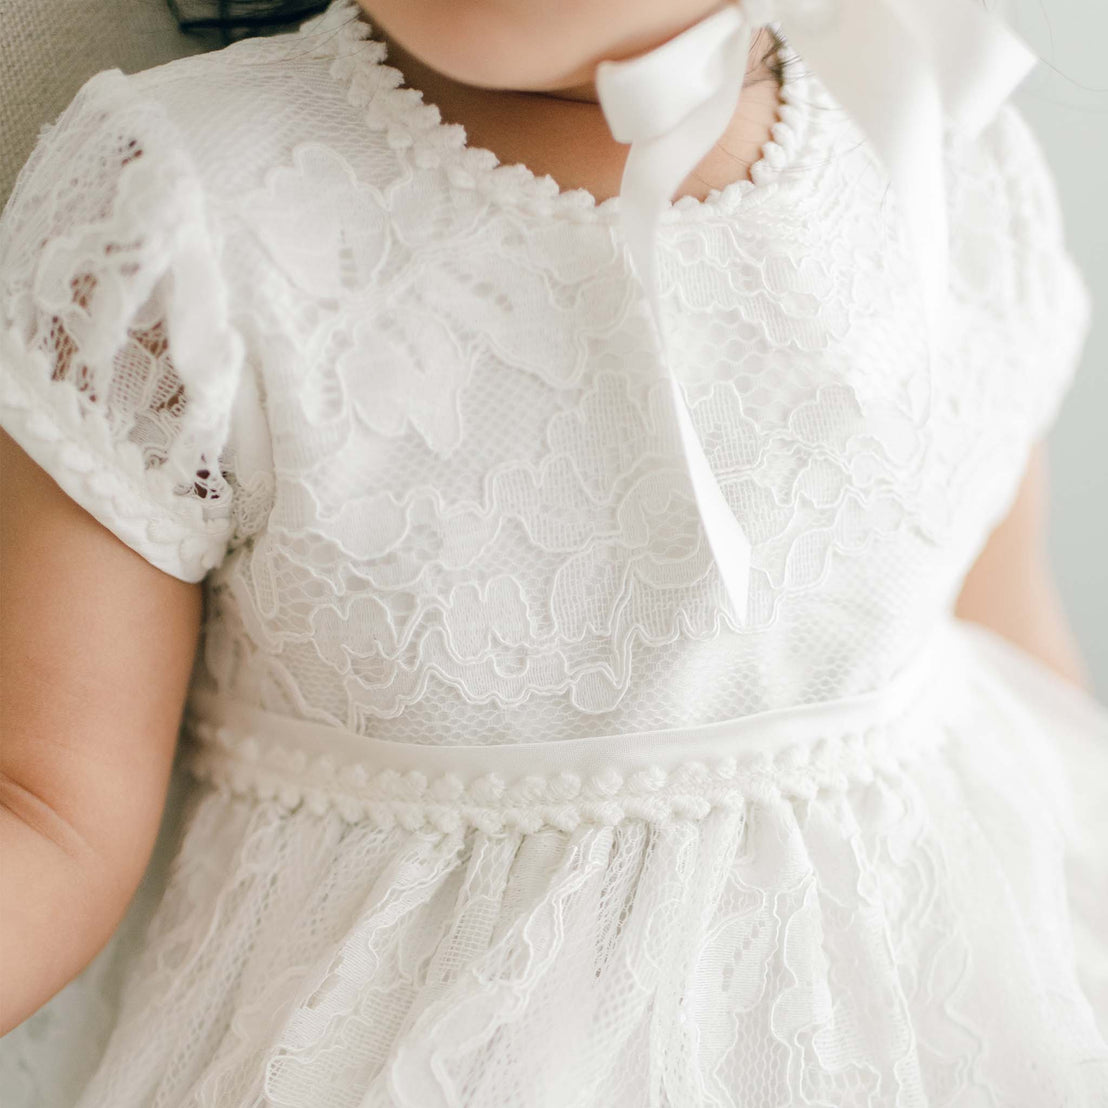 Detail of the ivory Victoria Puff Sleeve Christening Dress showcasing the ivory silk Dupioni lining under the embroidered ivory lace.